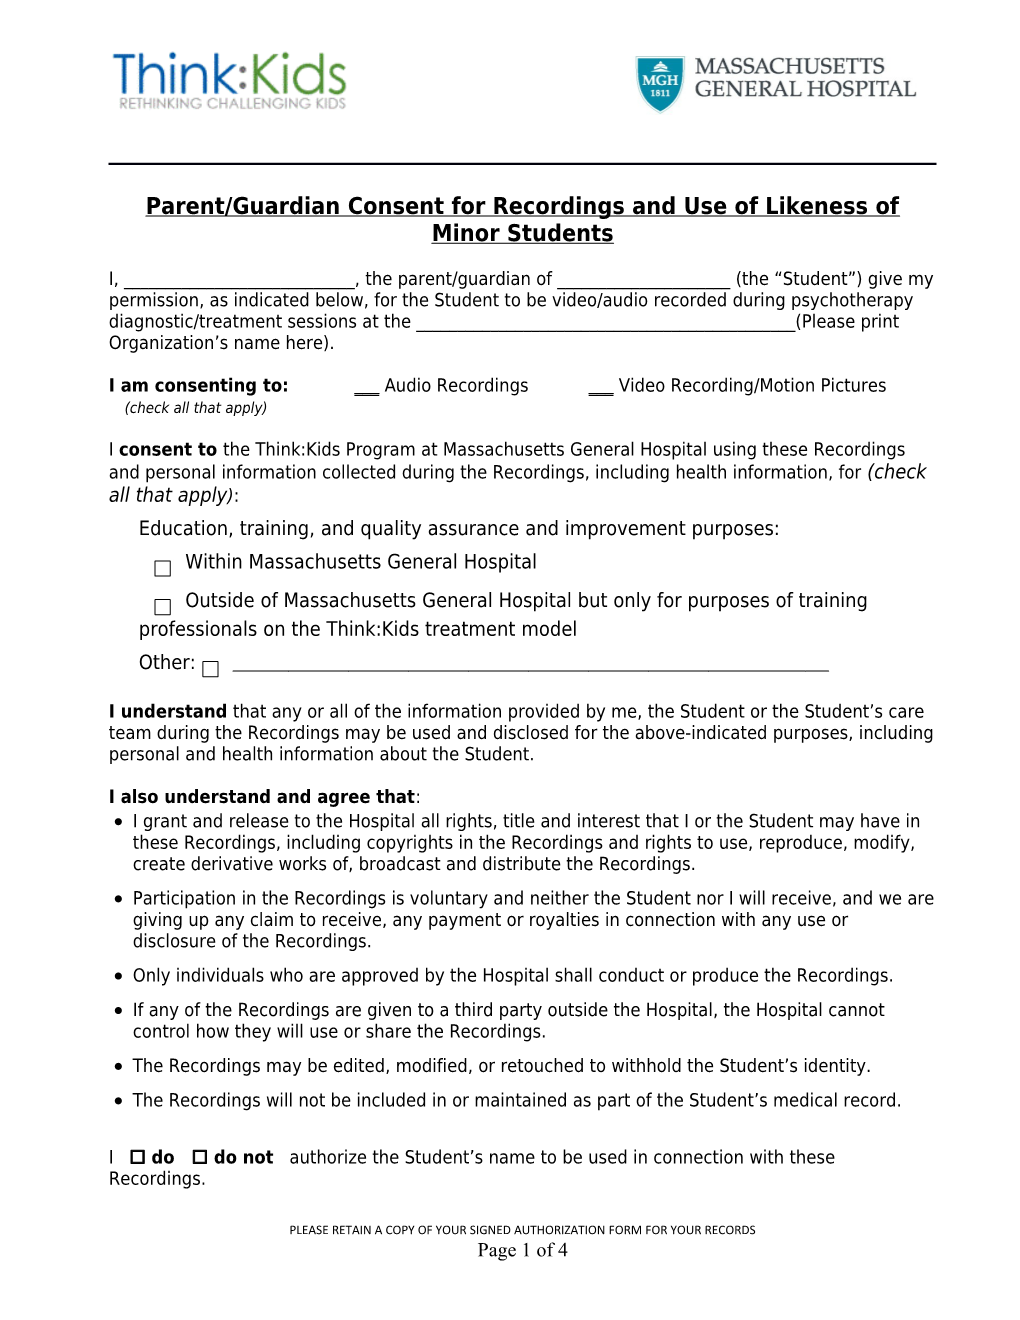 Parent/Guardian Consent for Recordings and Use of Likeness of Minor Students